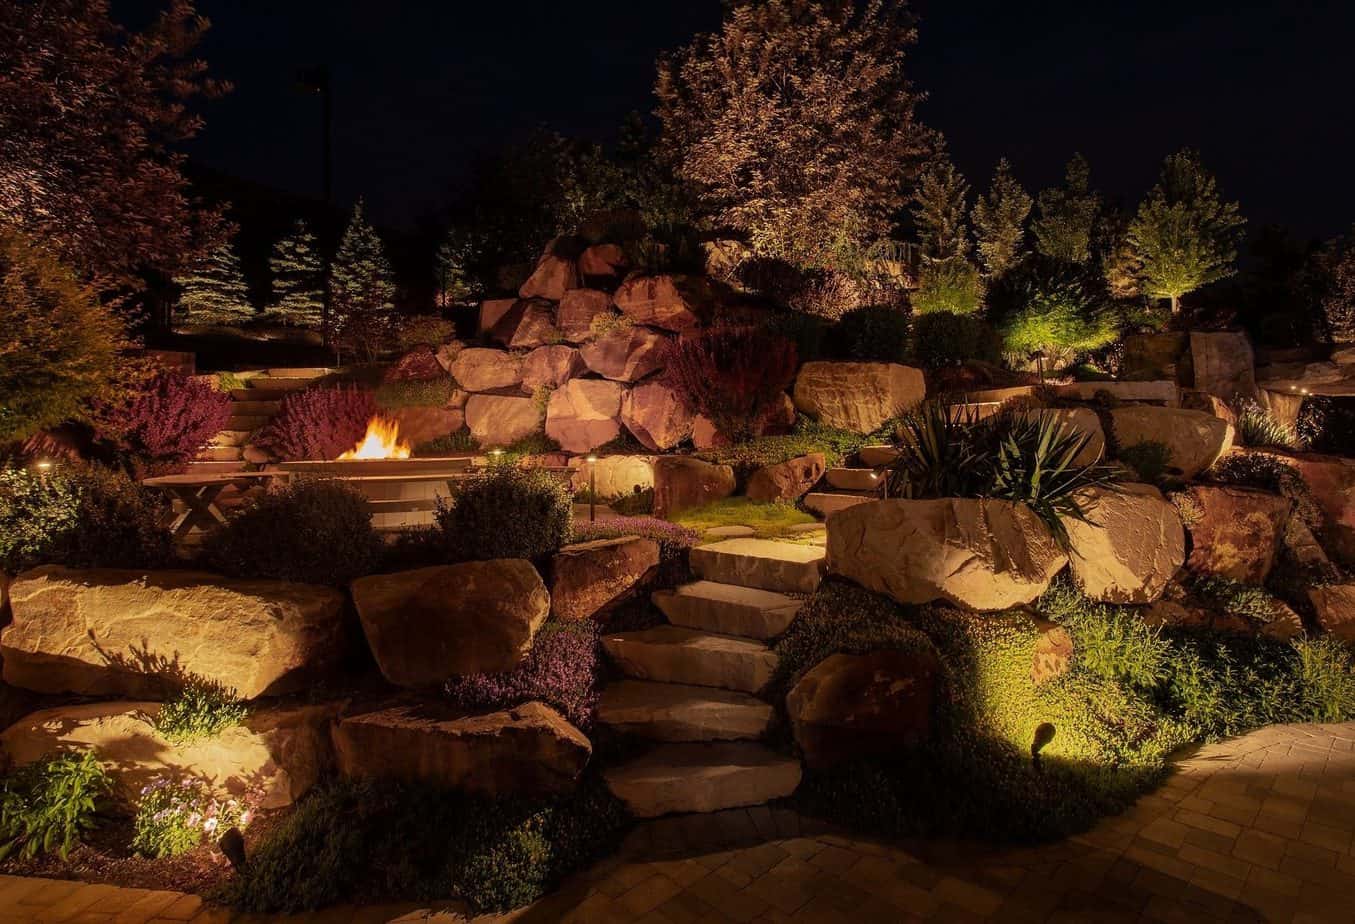 Outdoor lighting that highlights the rocks, casting ample light on the overall landscape and walkway